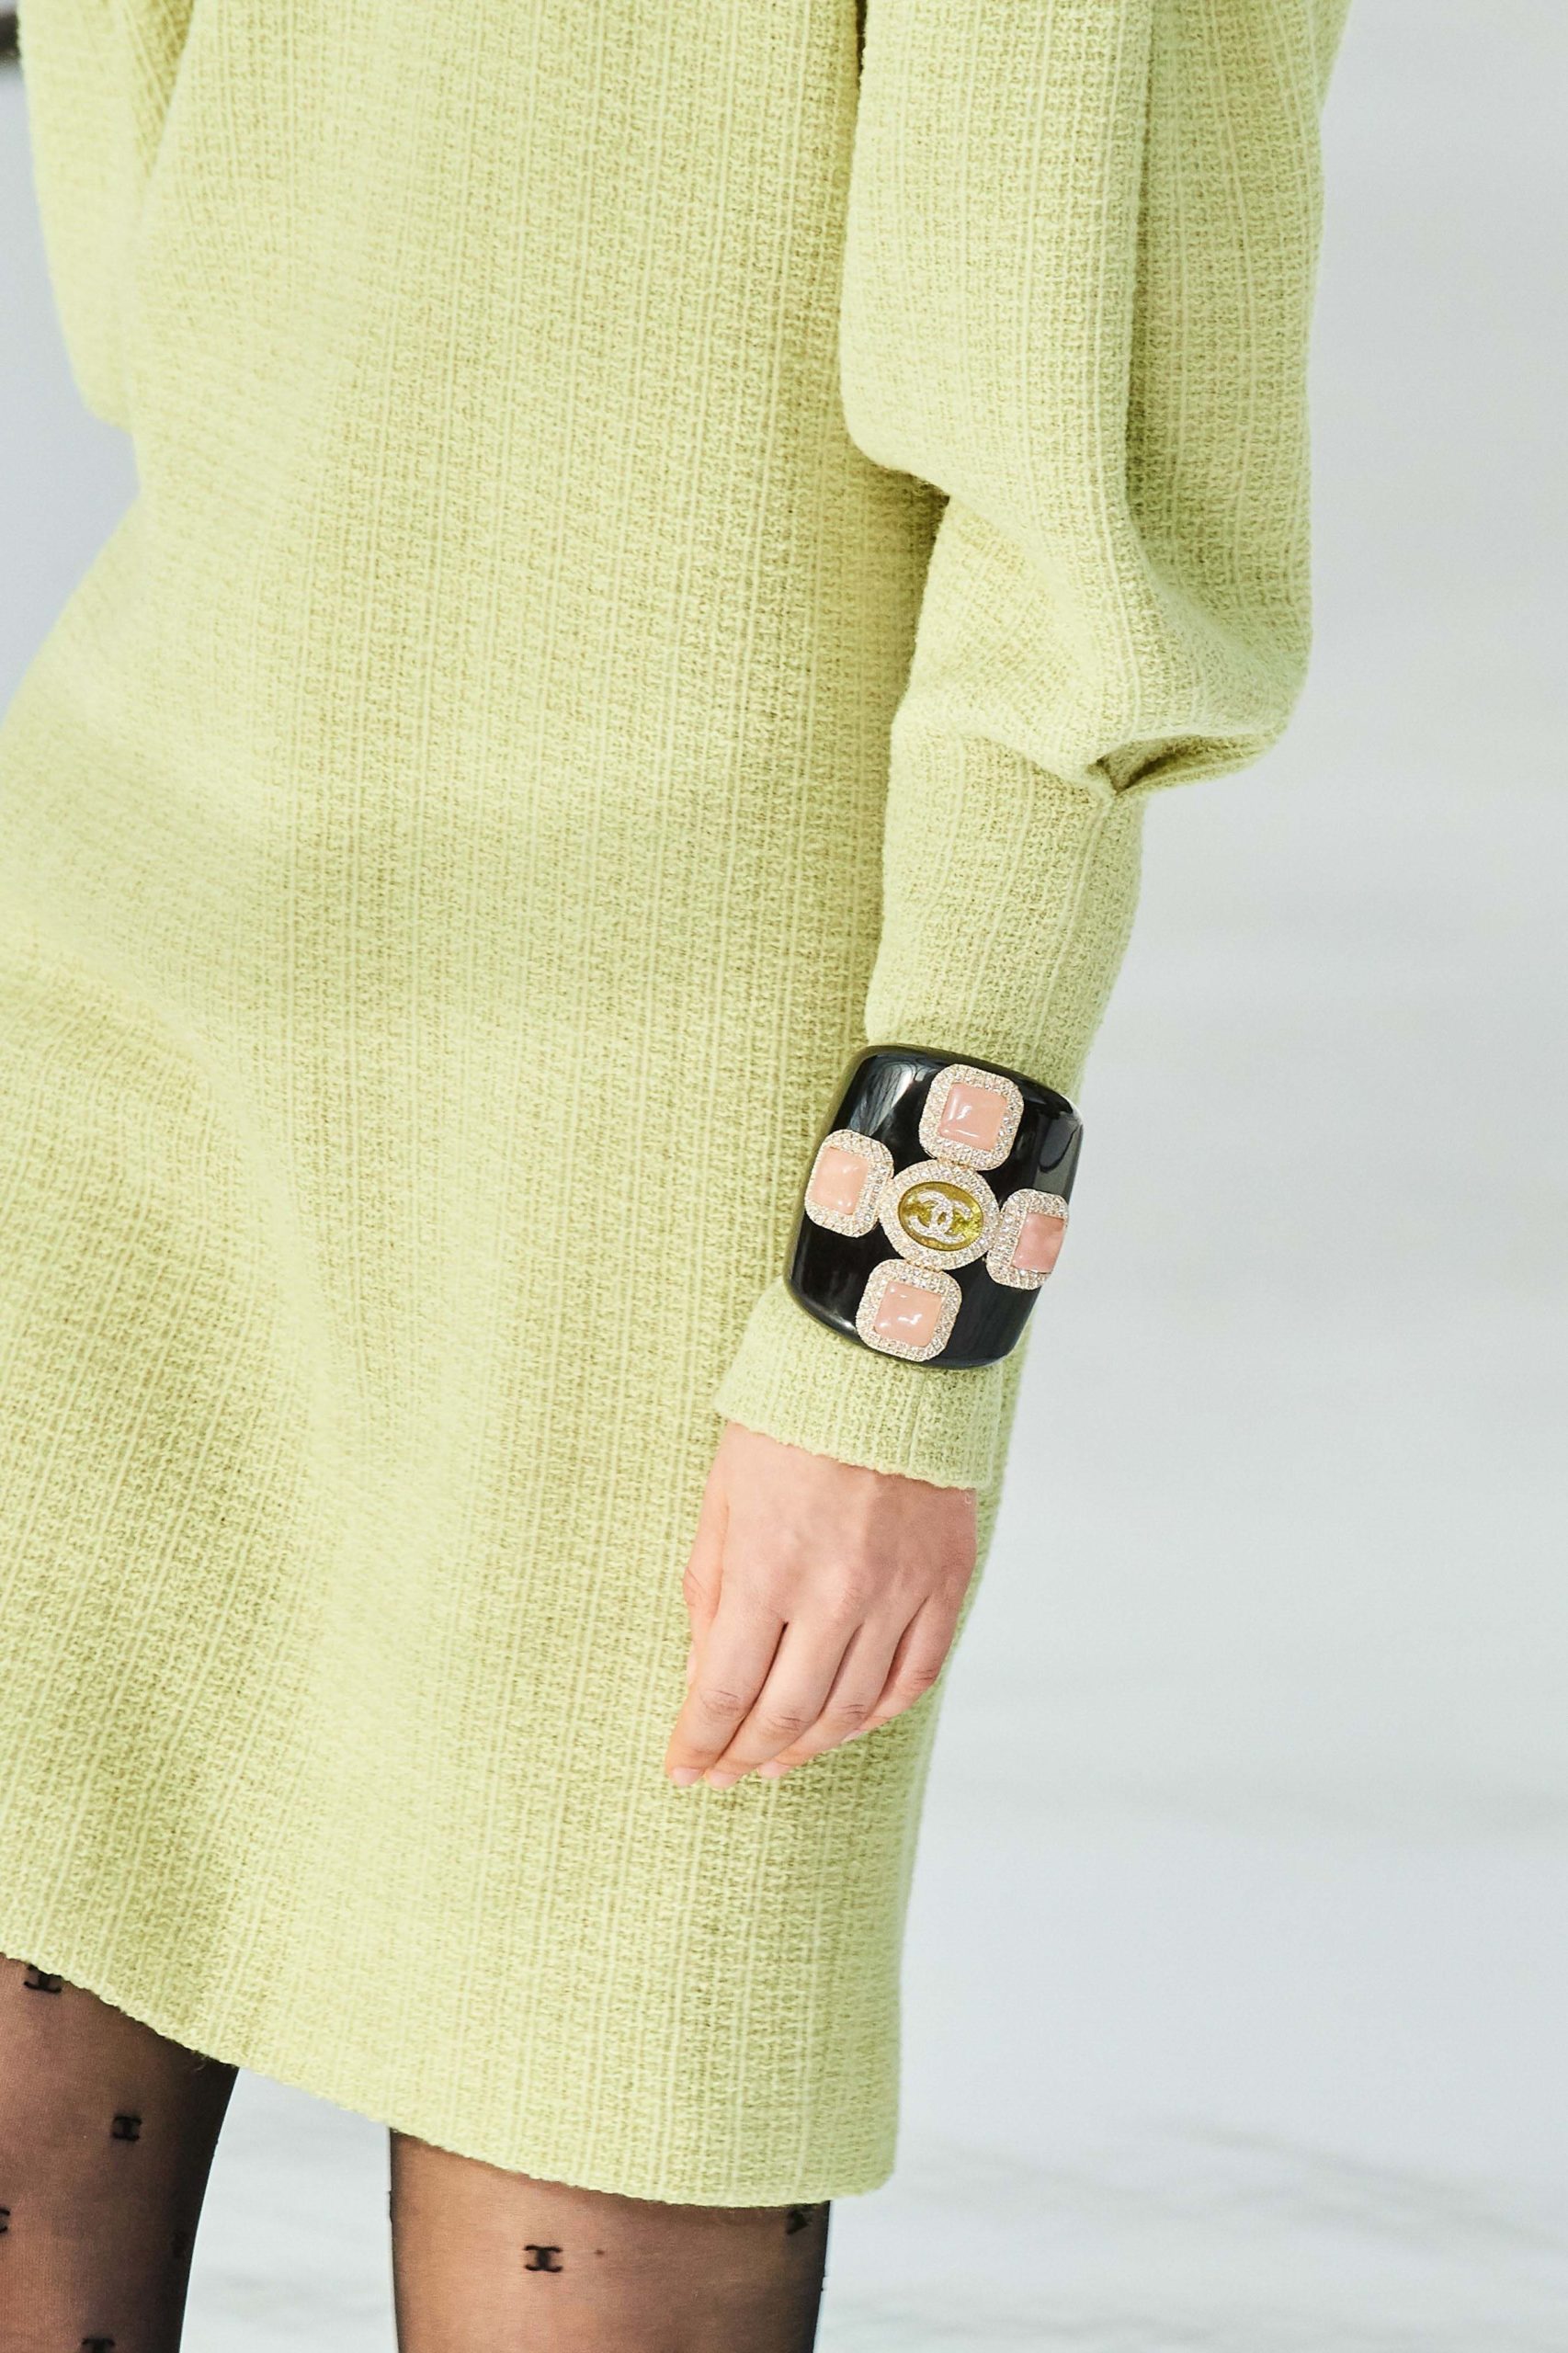 Chanel Fall Winter 2020 trends runway coverage Ready To Wear Vogue vintage bangle